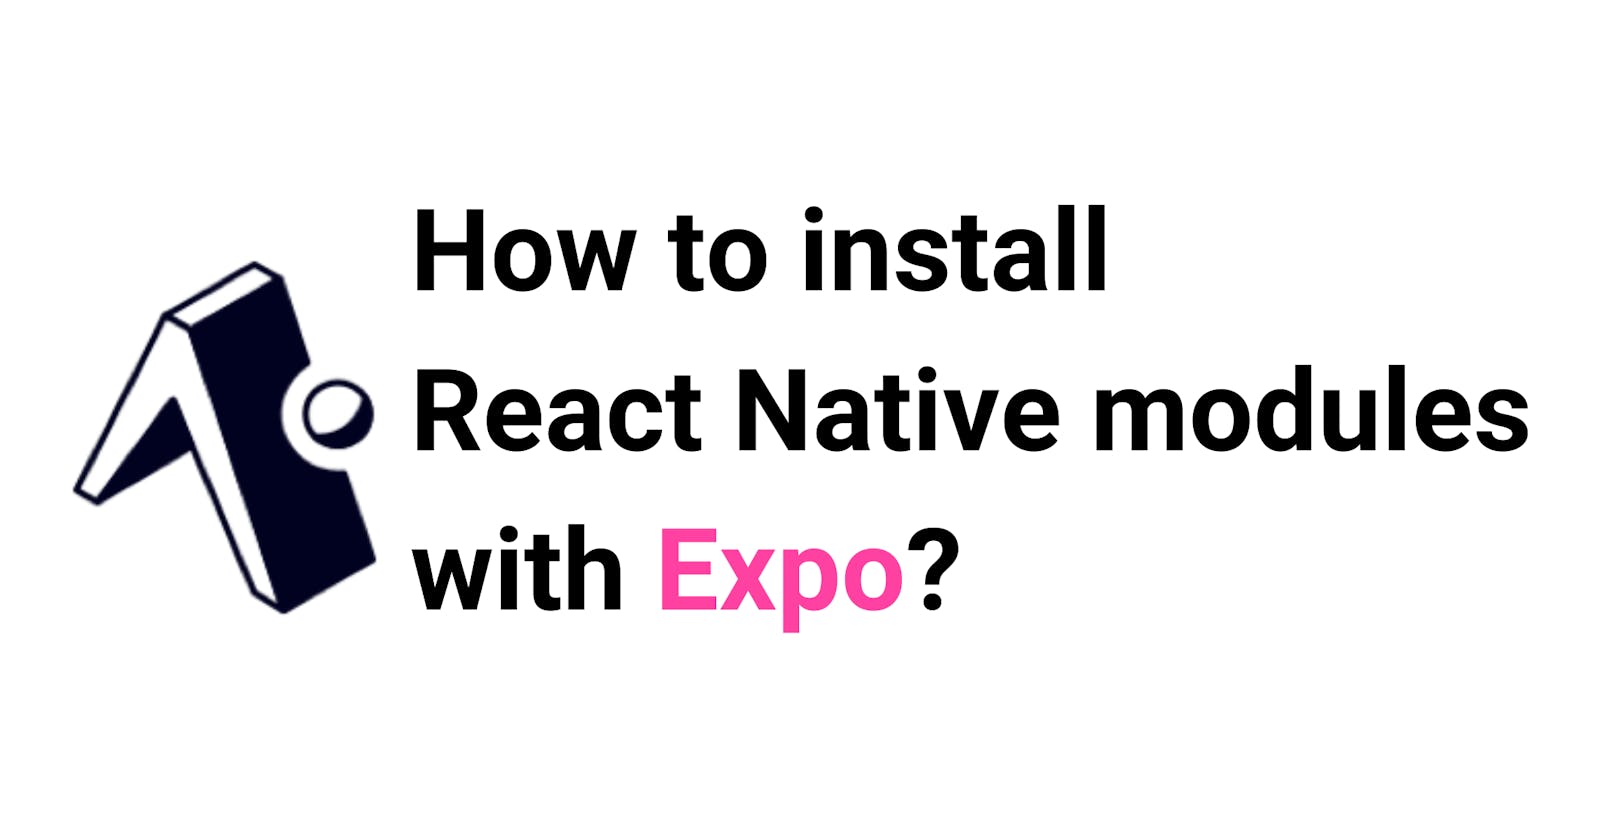 Install React Native modules with Expo